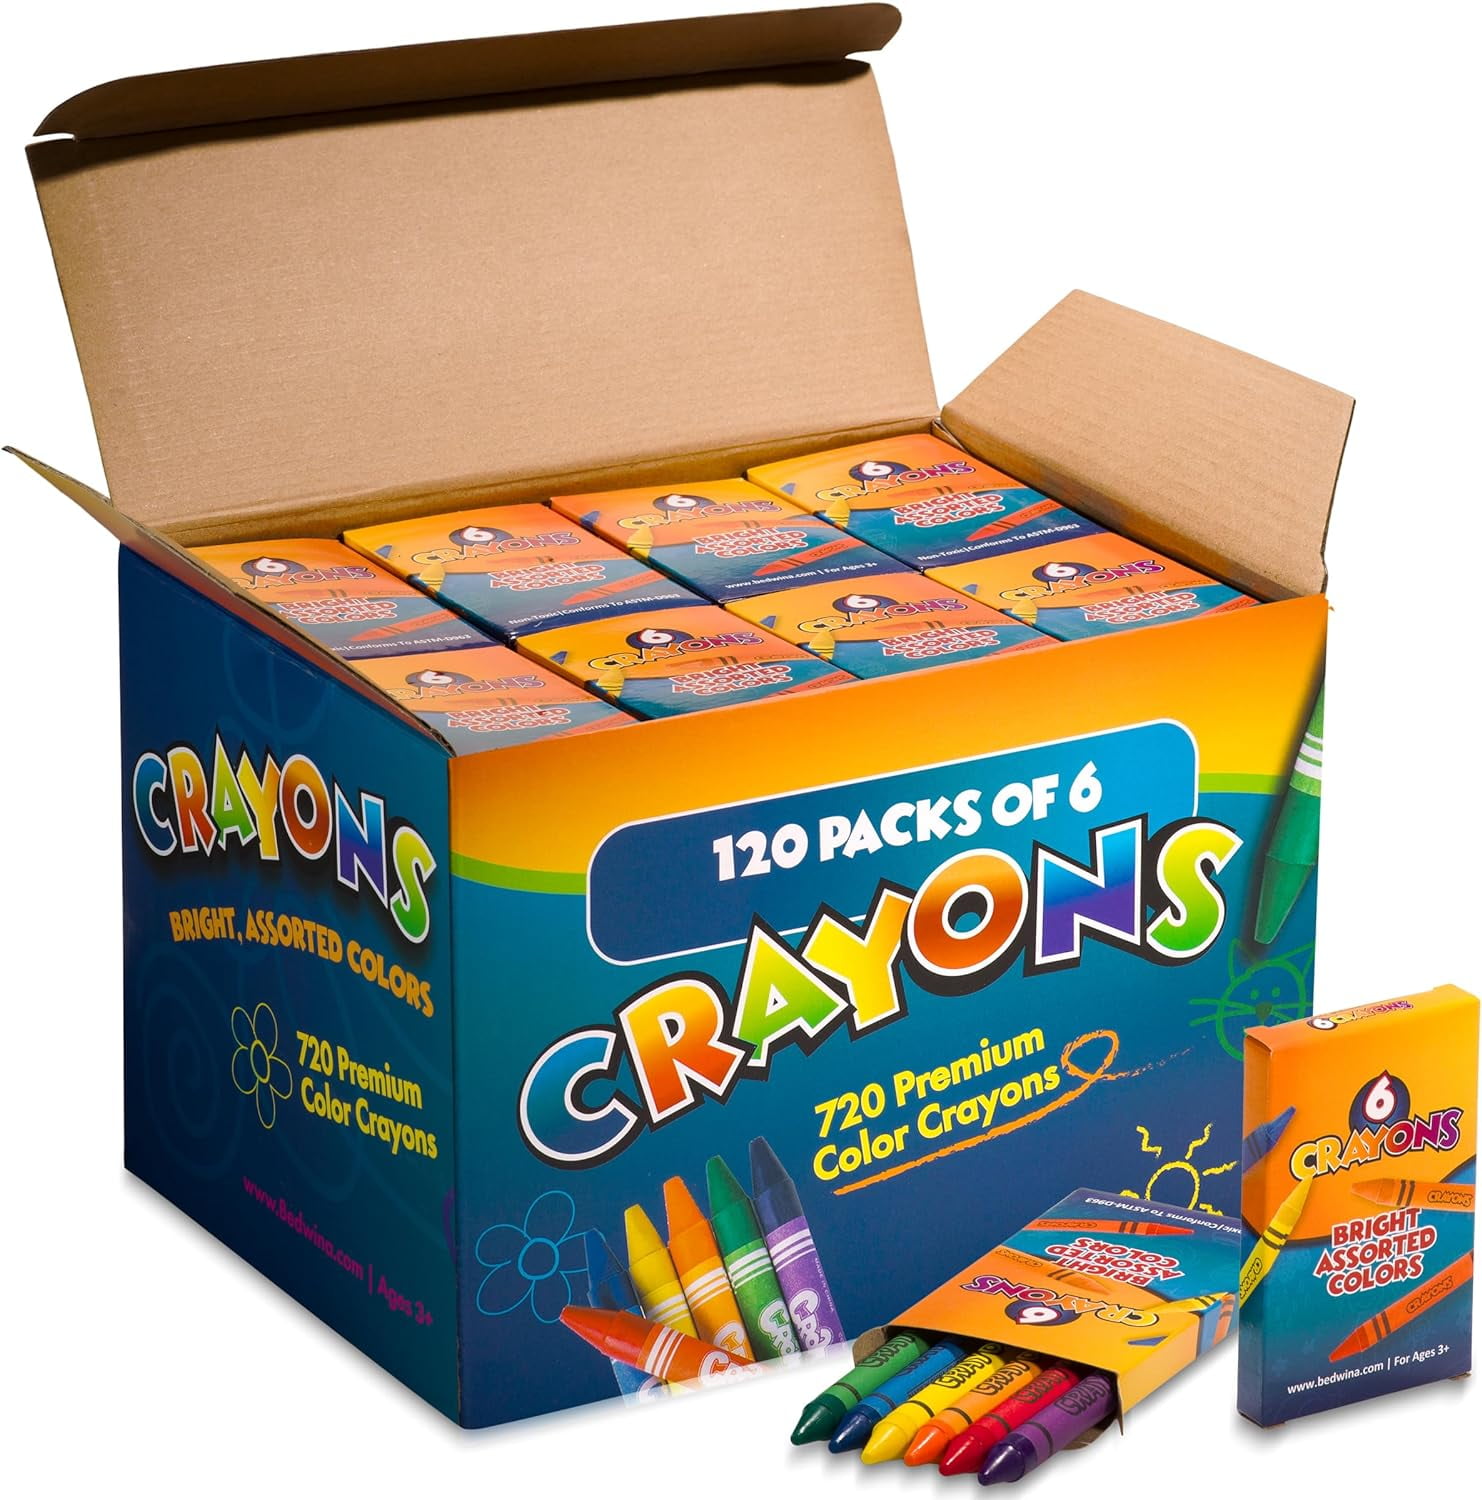 DDI 2330324 Crayola Crayons - 8 Count Assorted Colors Case of 48